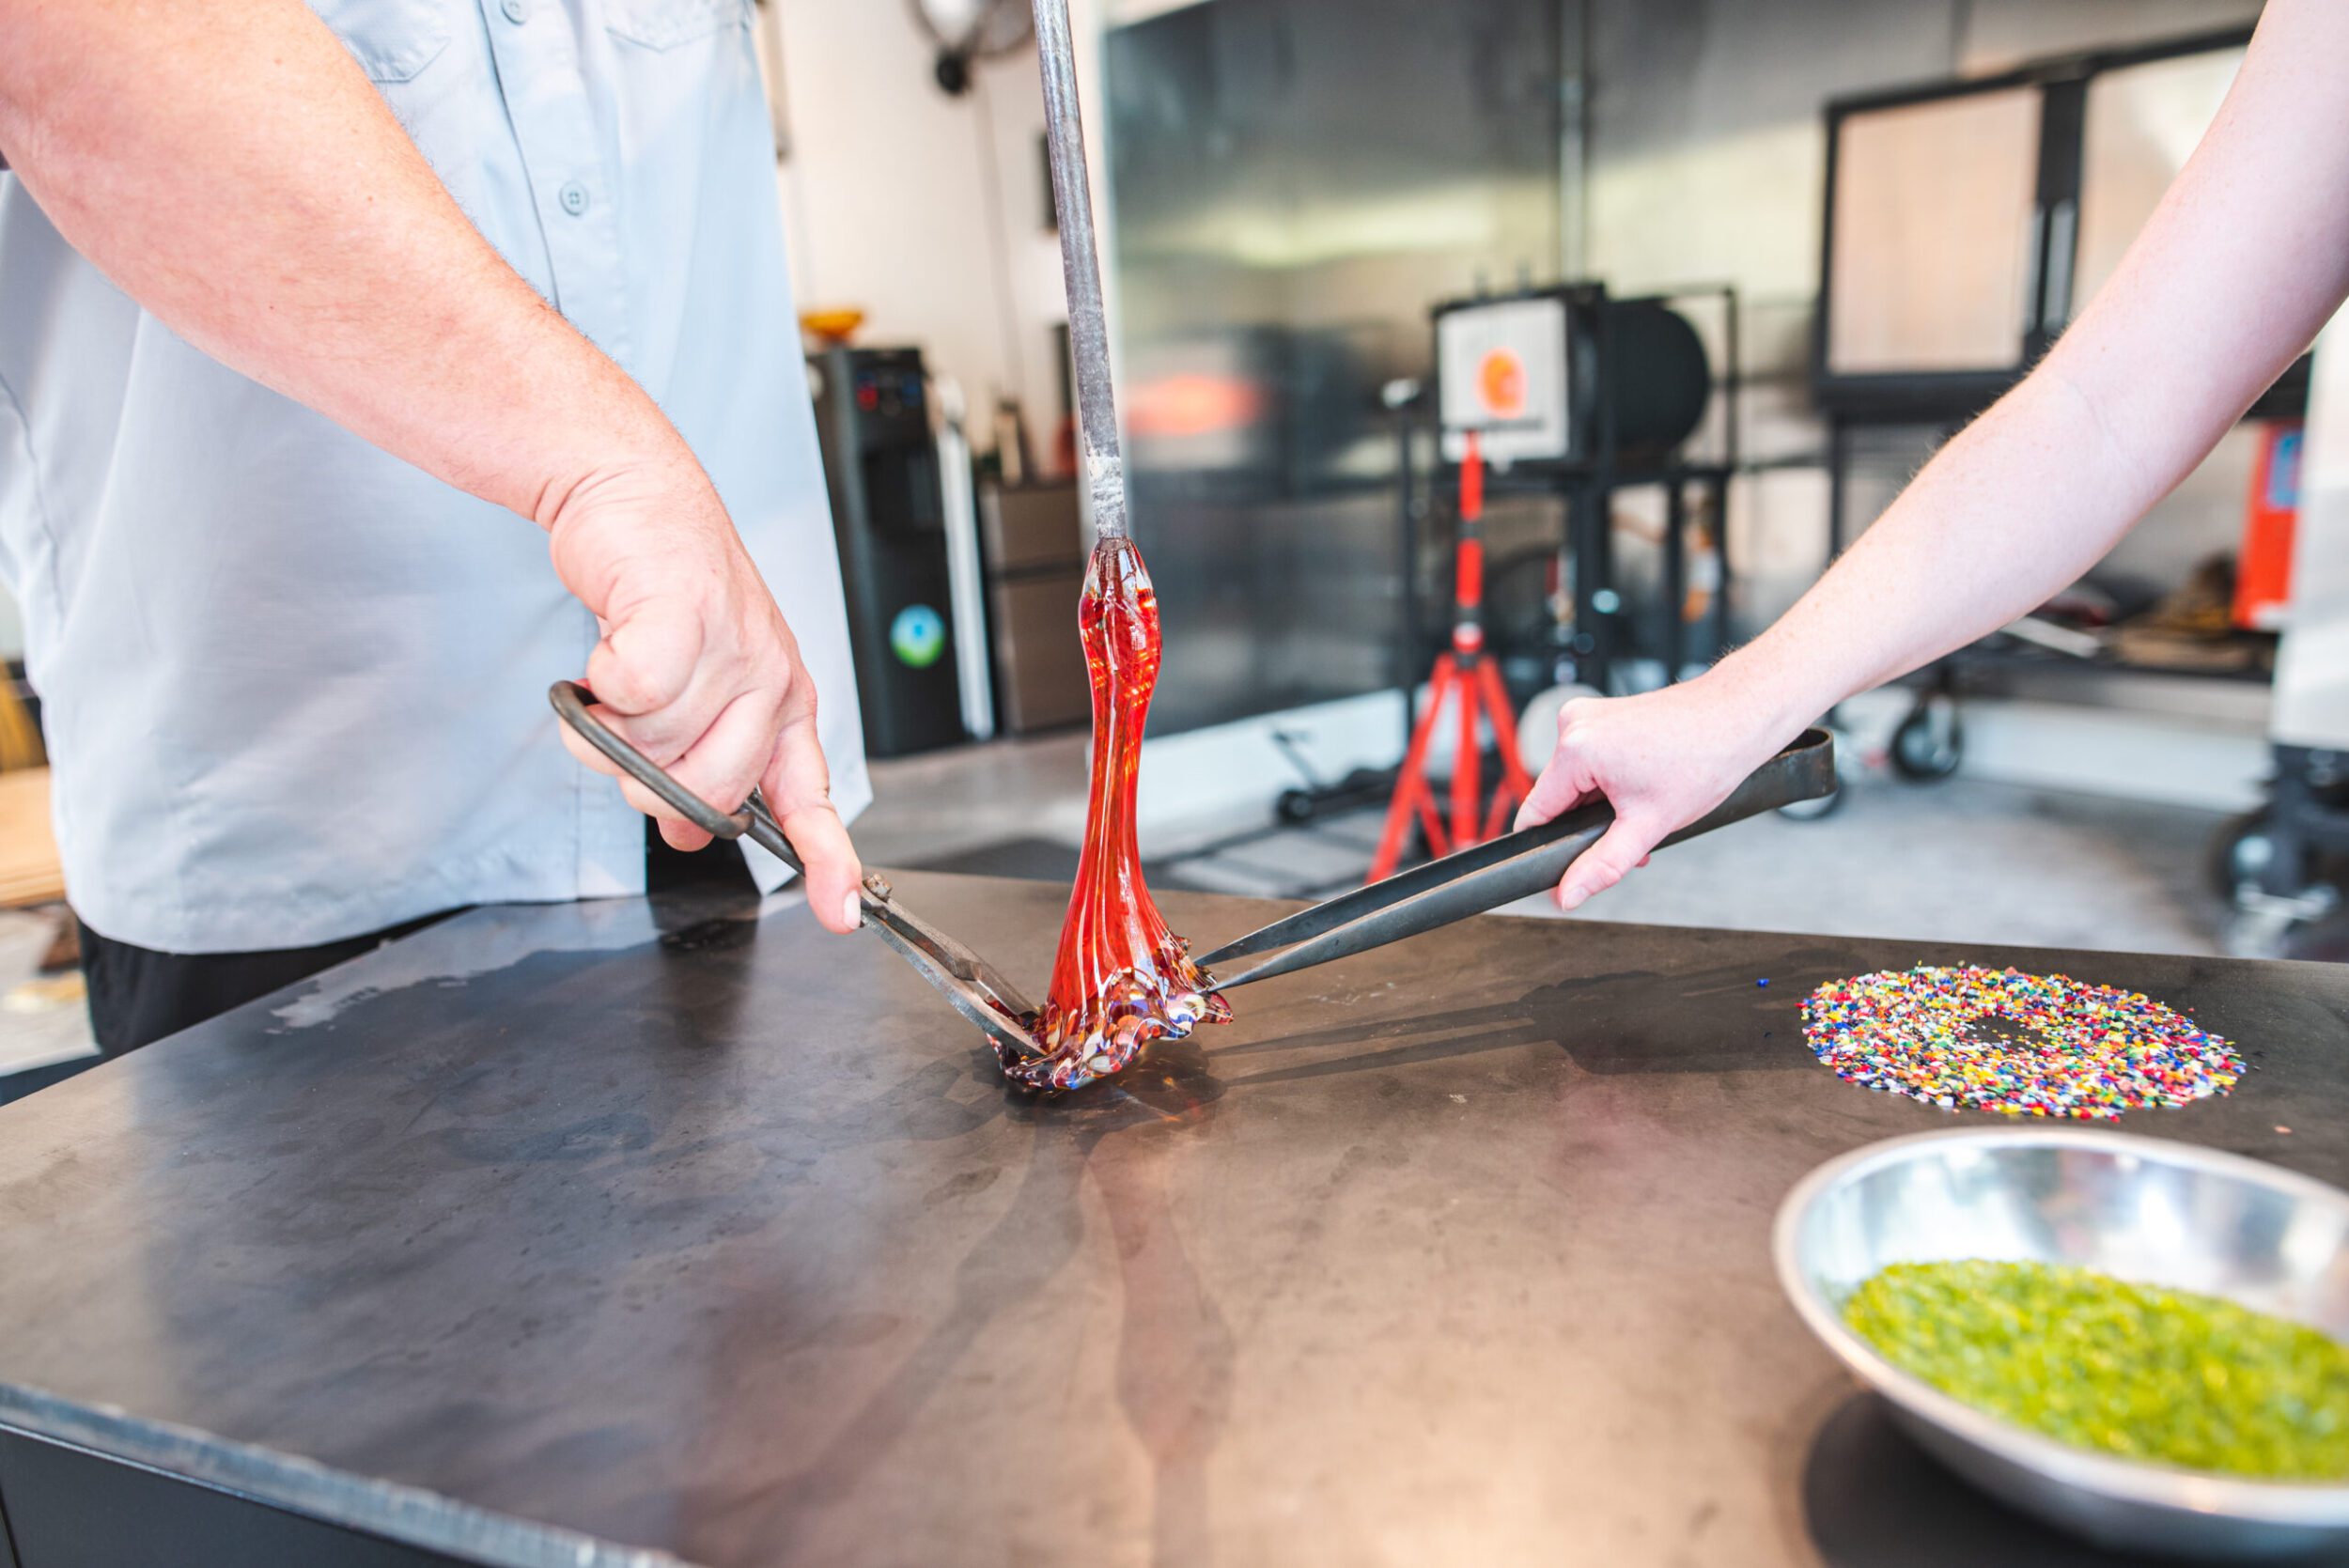 Brandon Price and the art of glassblowing